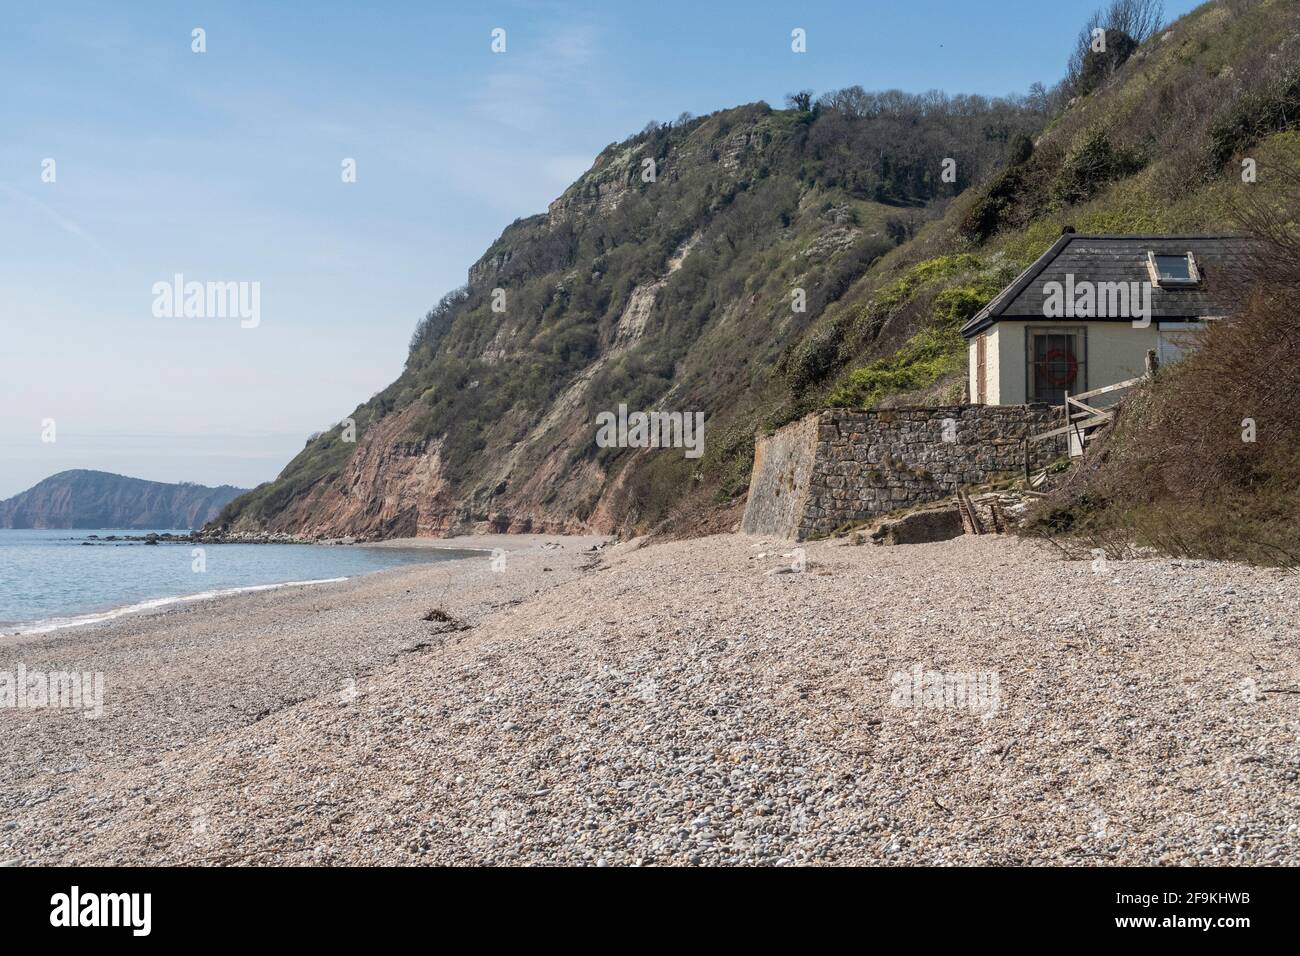 A house on the beach at Weston Mouth, between Branscombe and Sidmouth, Devon, part of the South West Coastal Path. Stock Photo